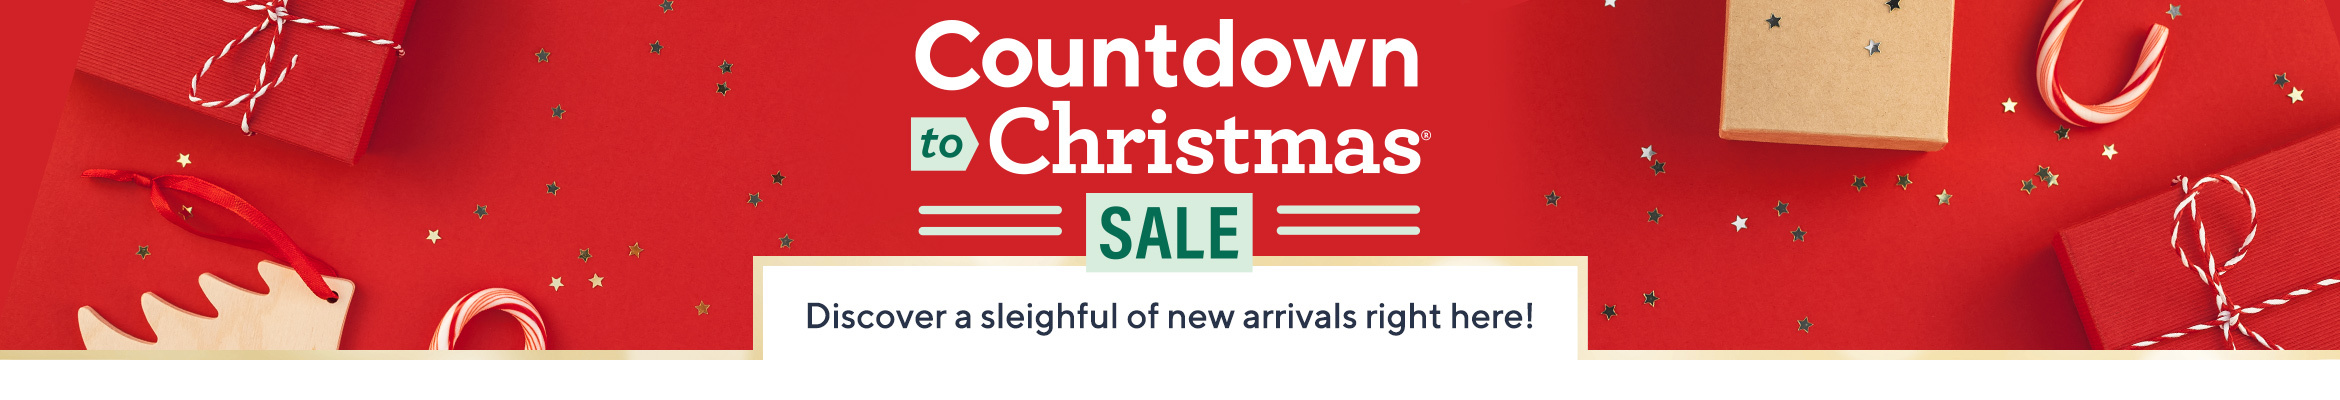 Countdown to Christmas® Sale Discover a sleighful of new arrivals right here! 